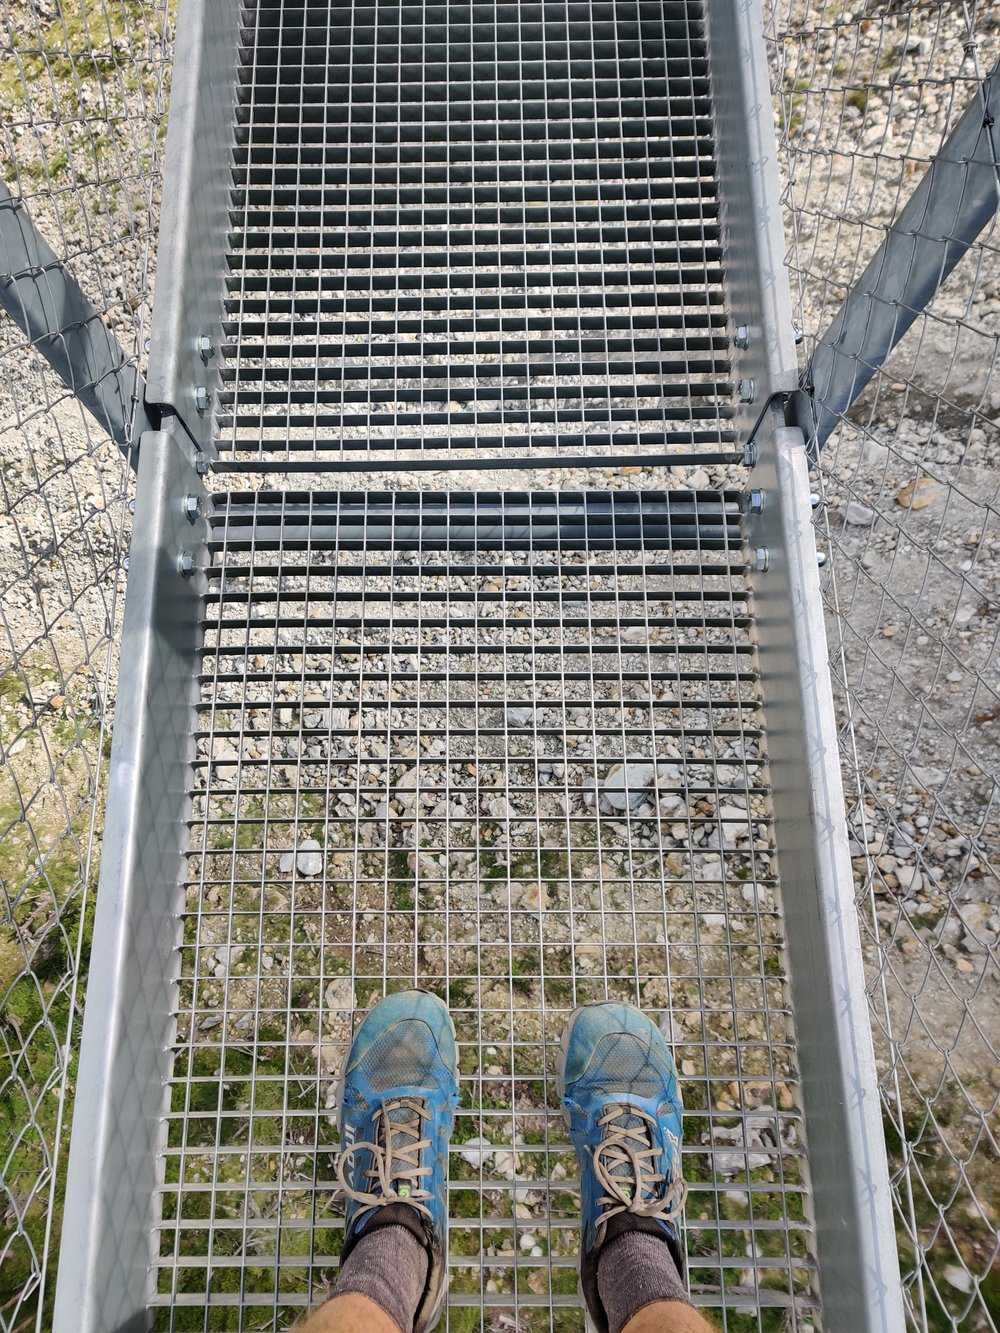 Charles Kuonen Suspension Bridge is only 65cm (~2ft wide) with a see through floor